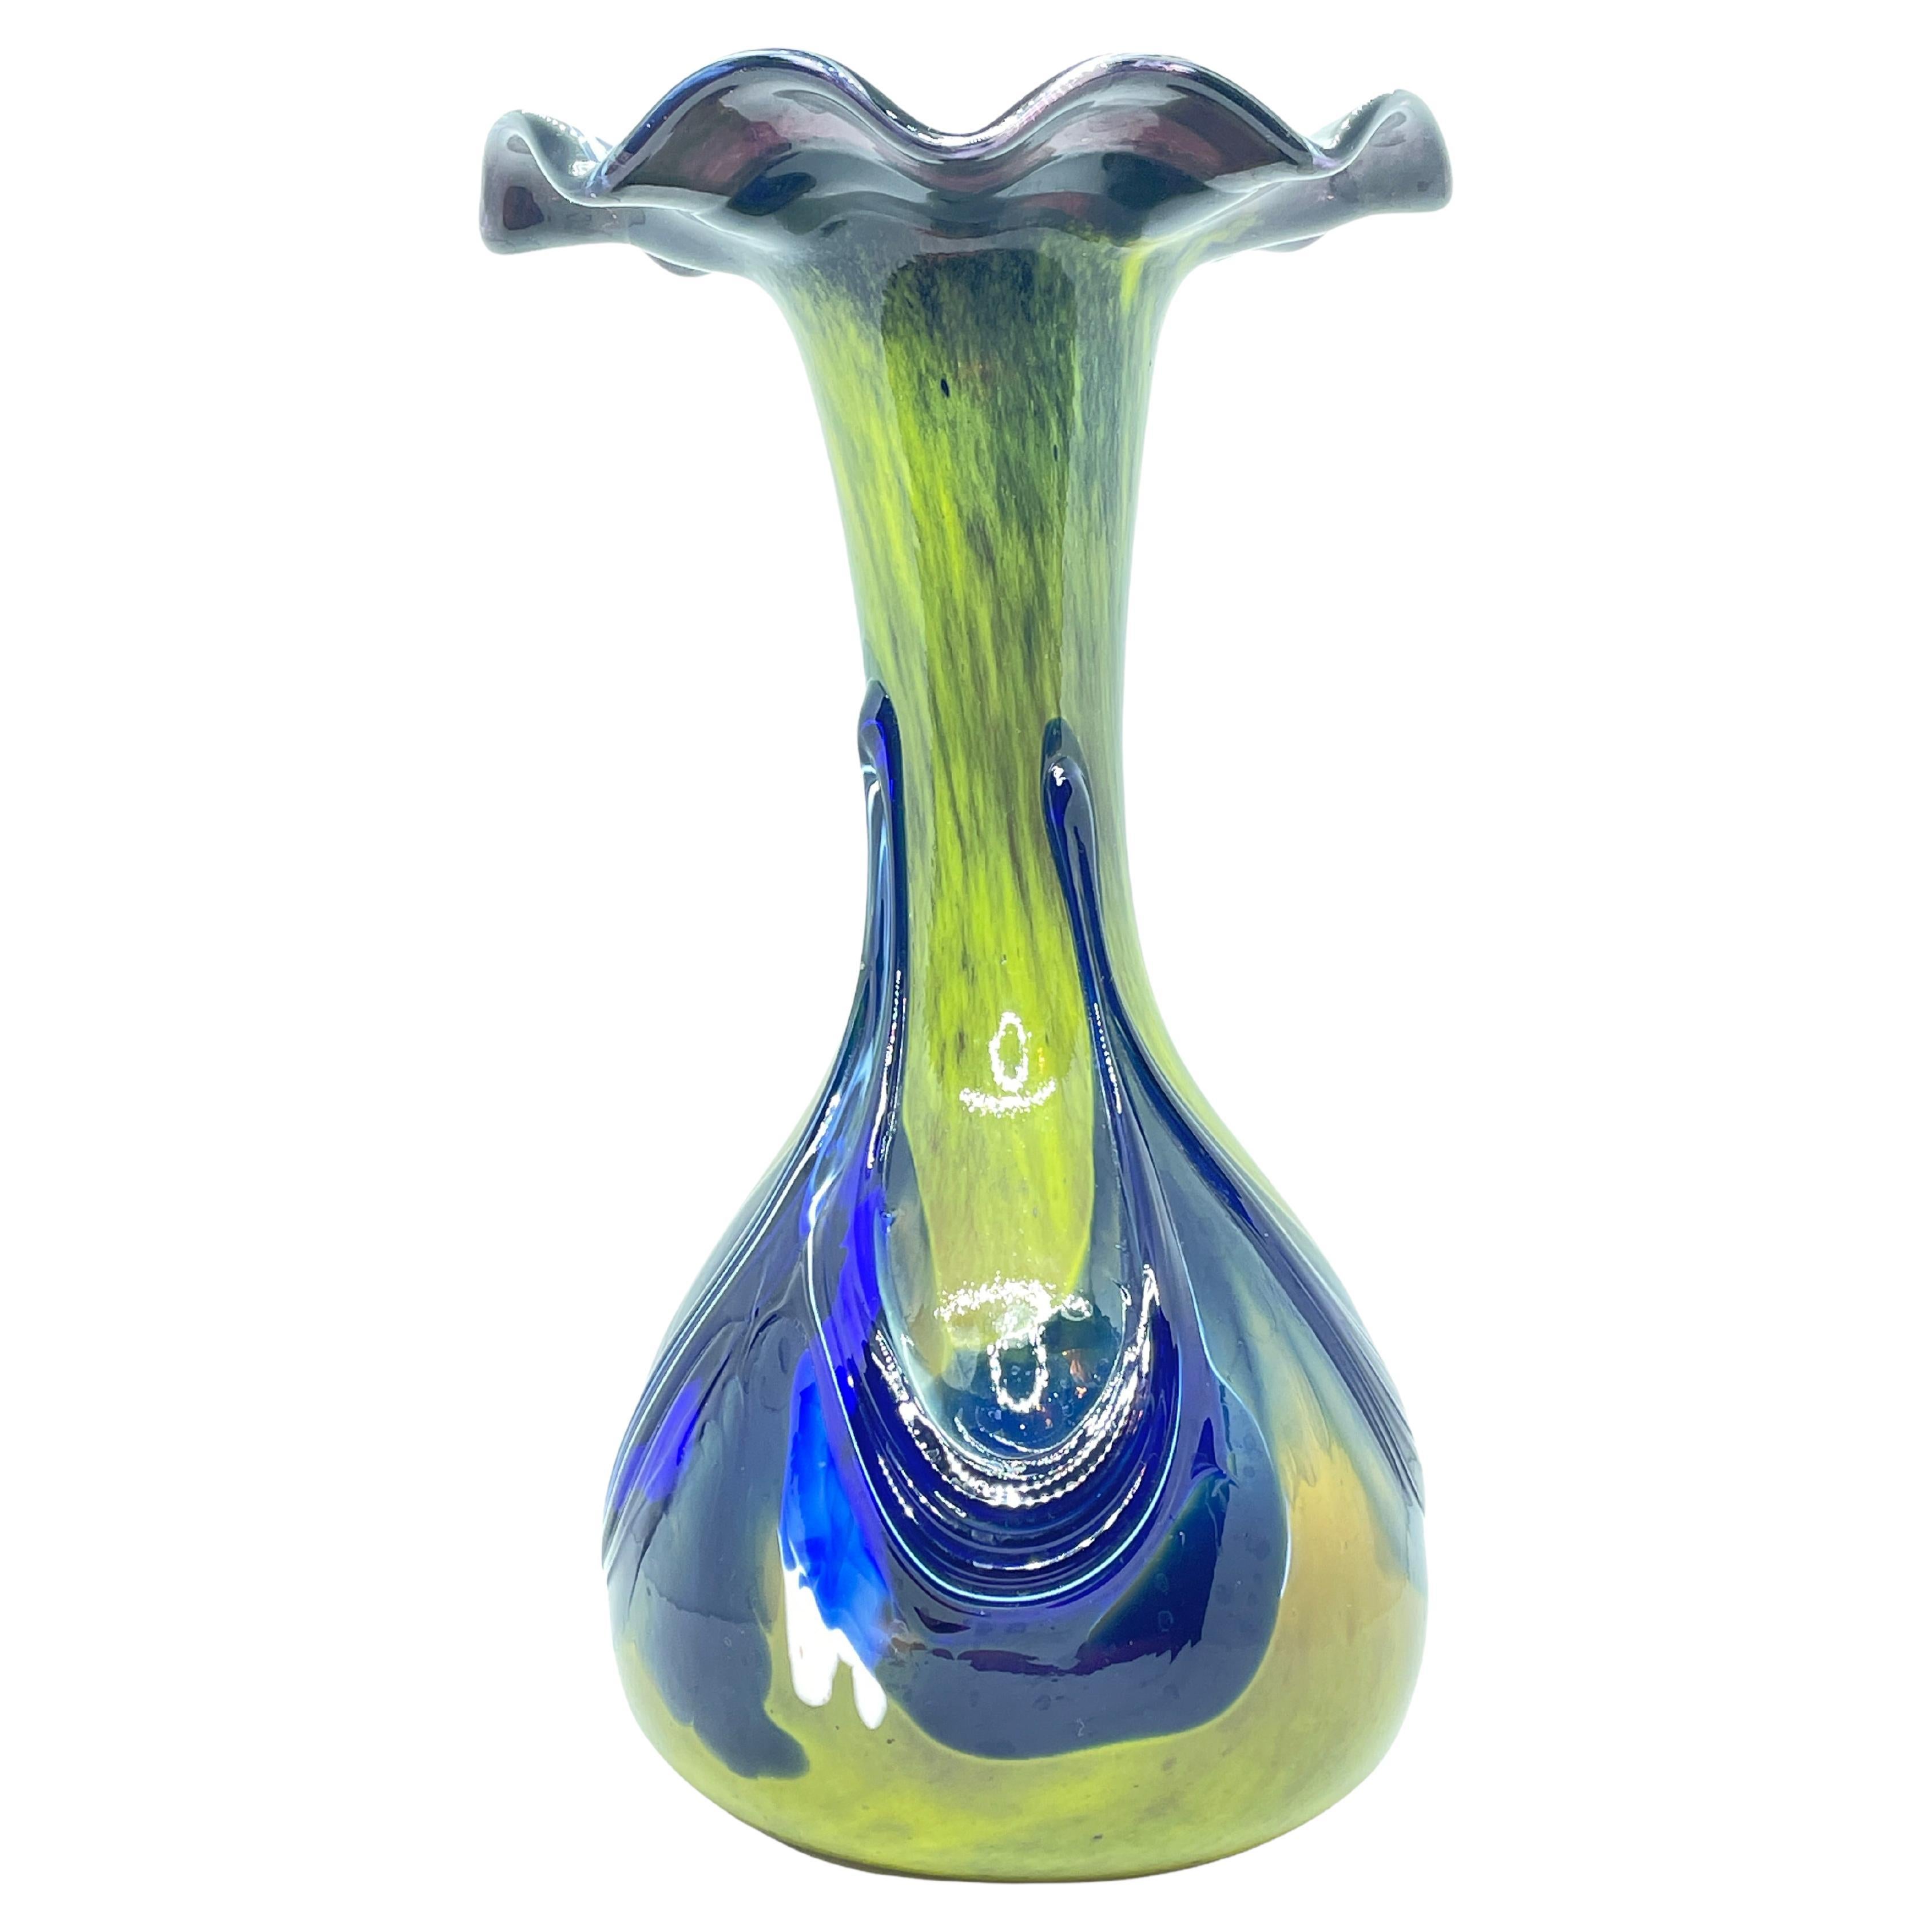 Beautiful Murano Glass Vase, Blue Green and White, Vintage Italy 1980s